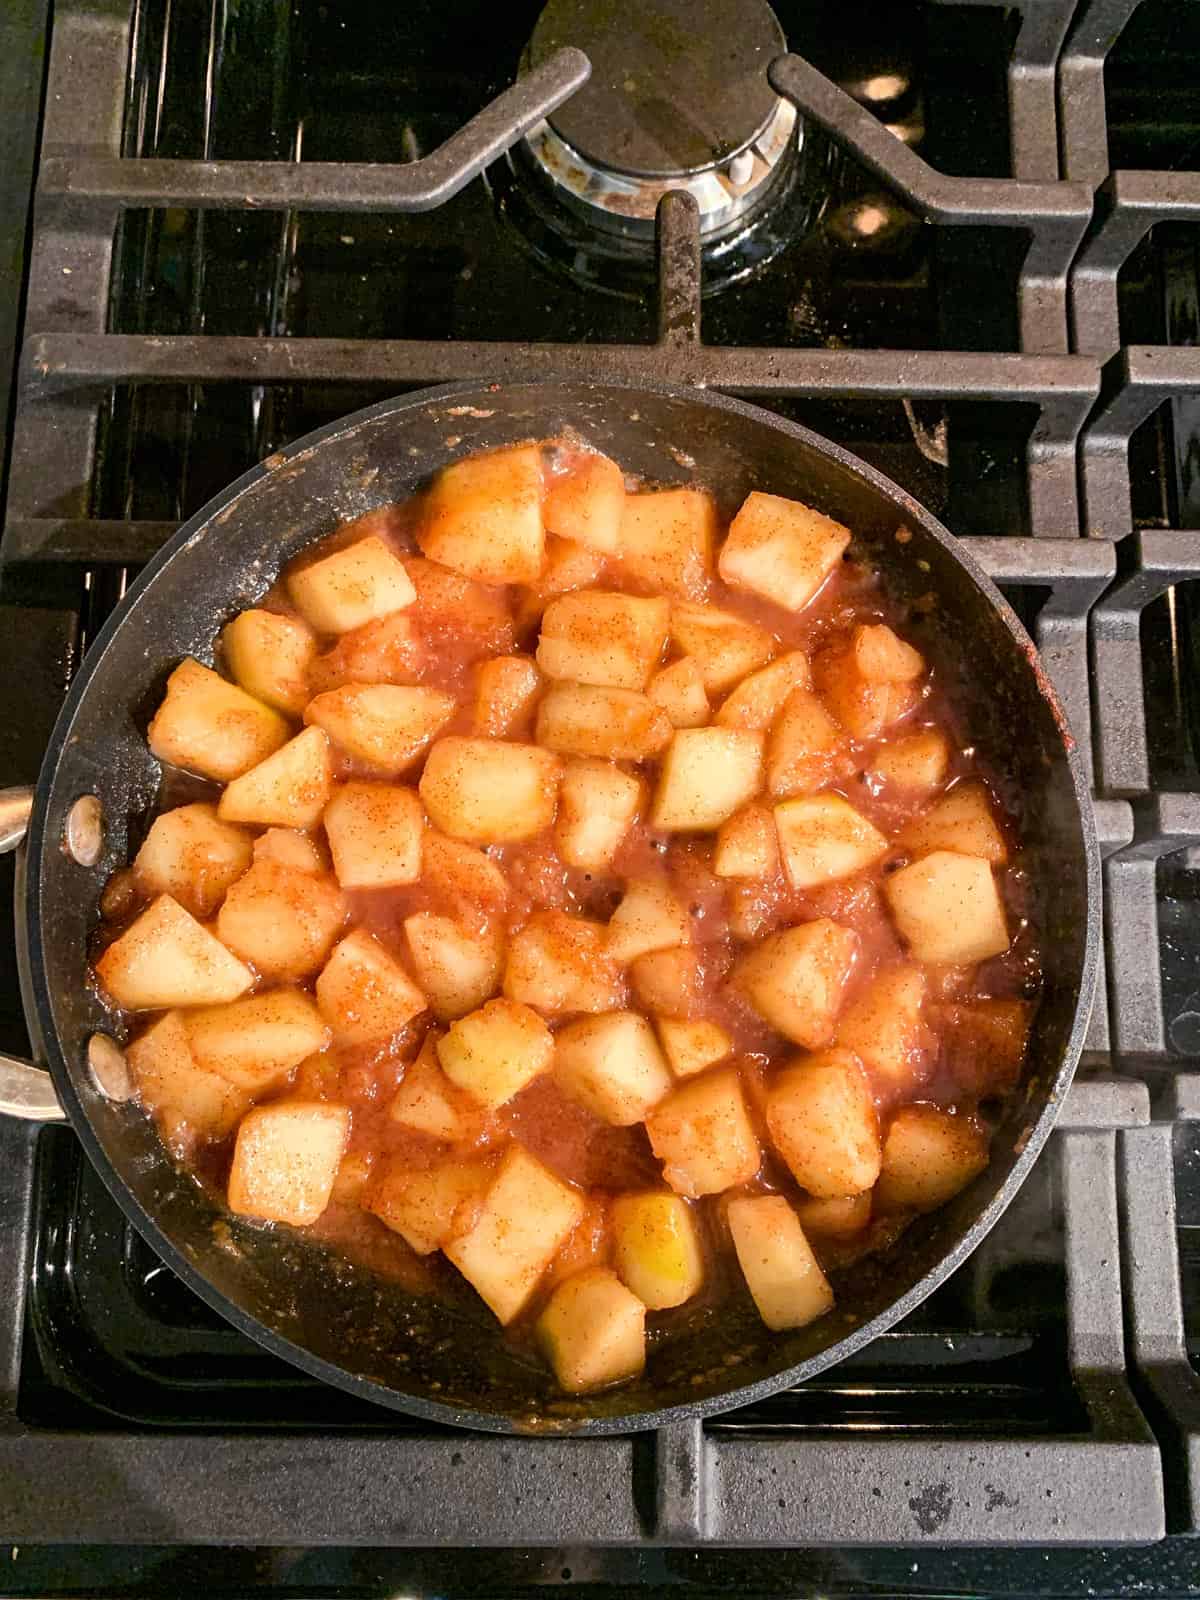 Diced apples simmering with cinnamon and maple syrup.